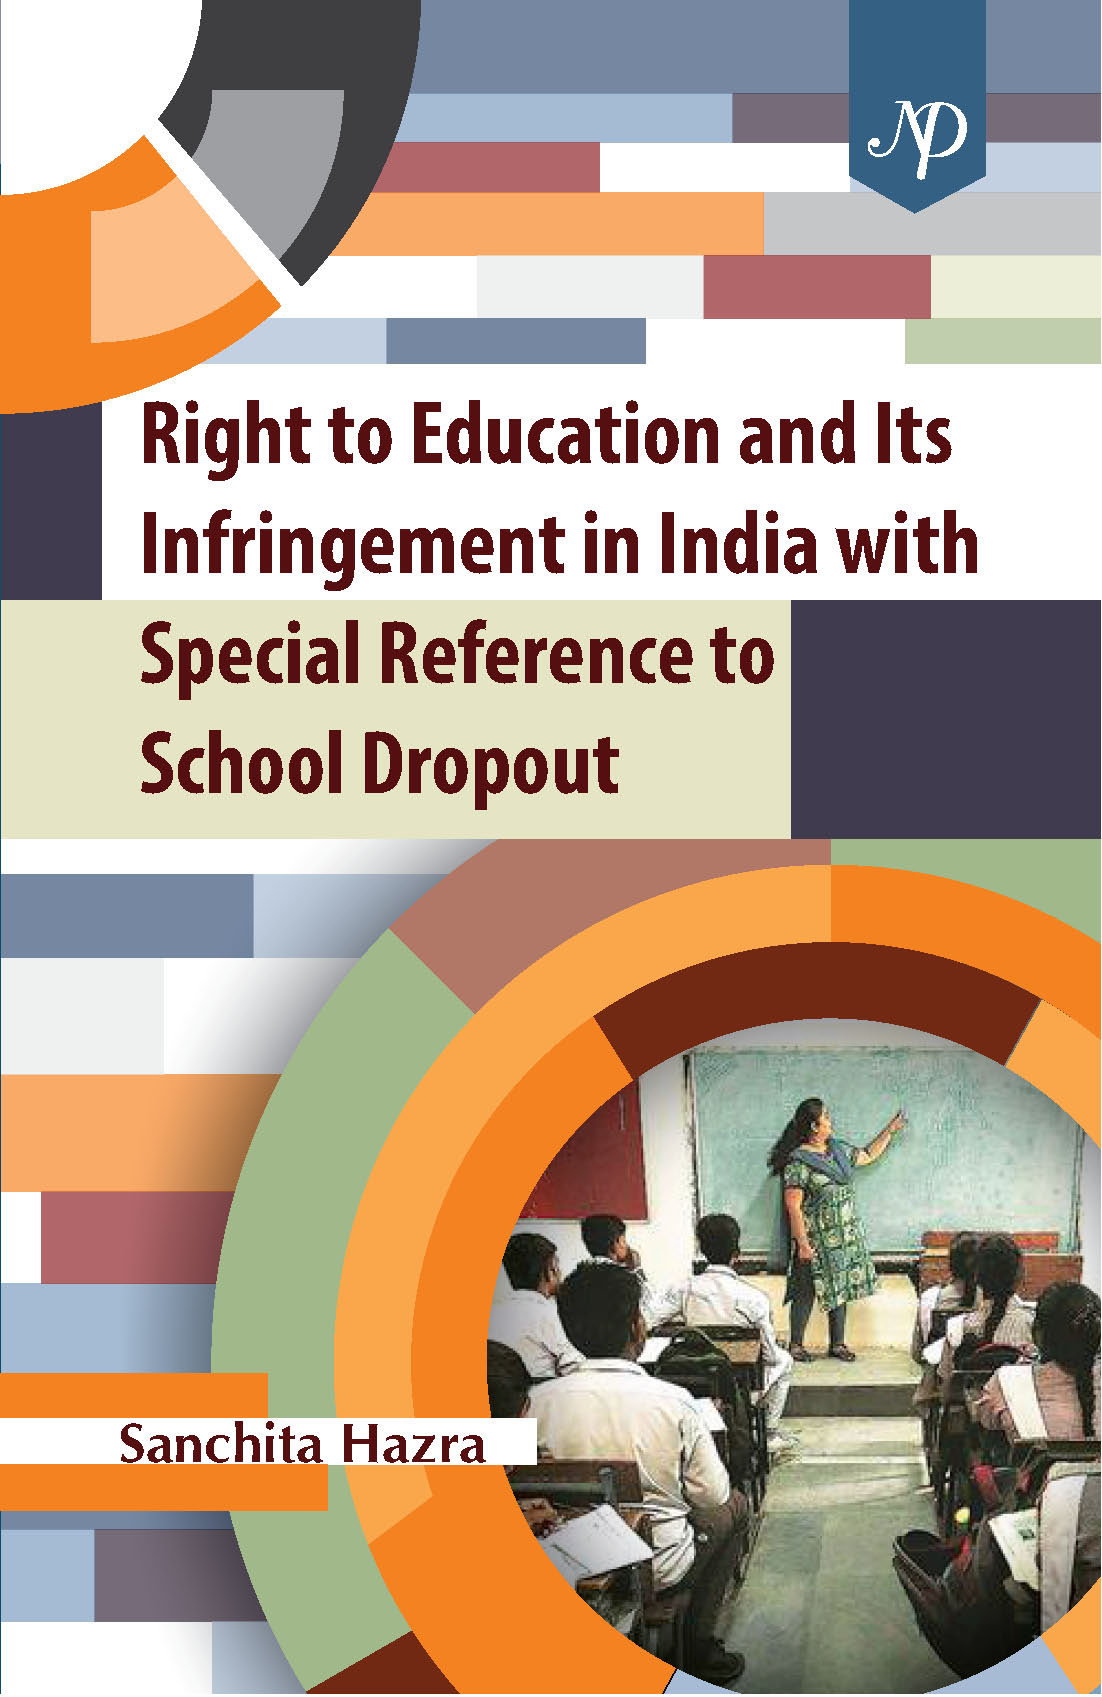 Right to education and school dropout Cover.jpg